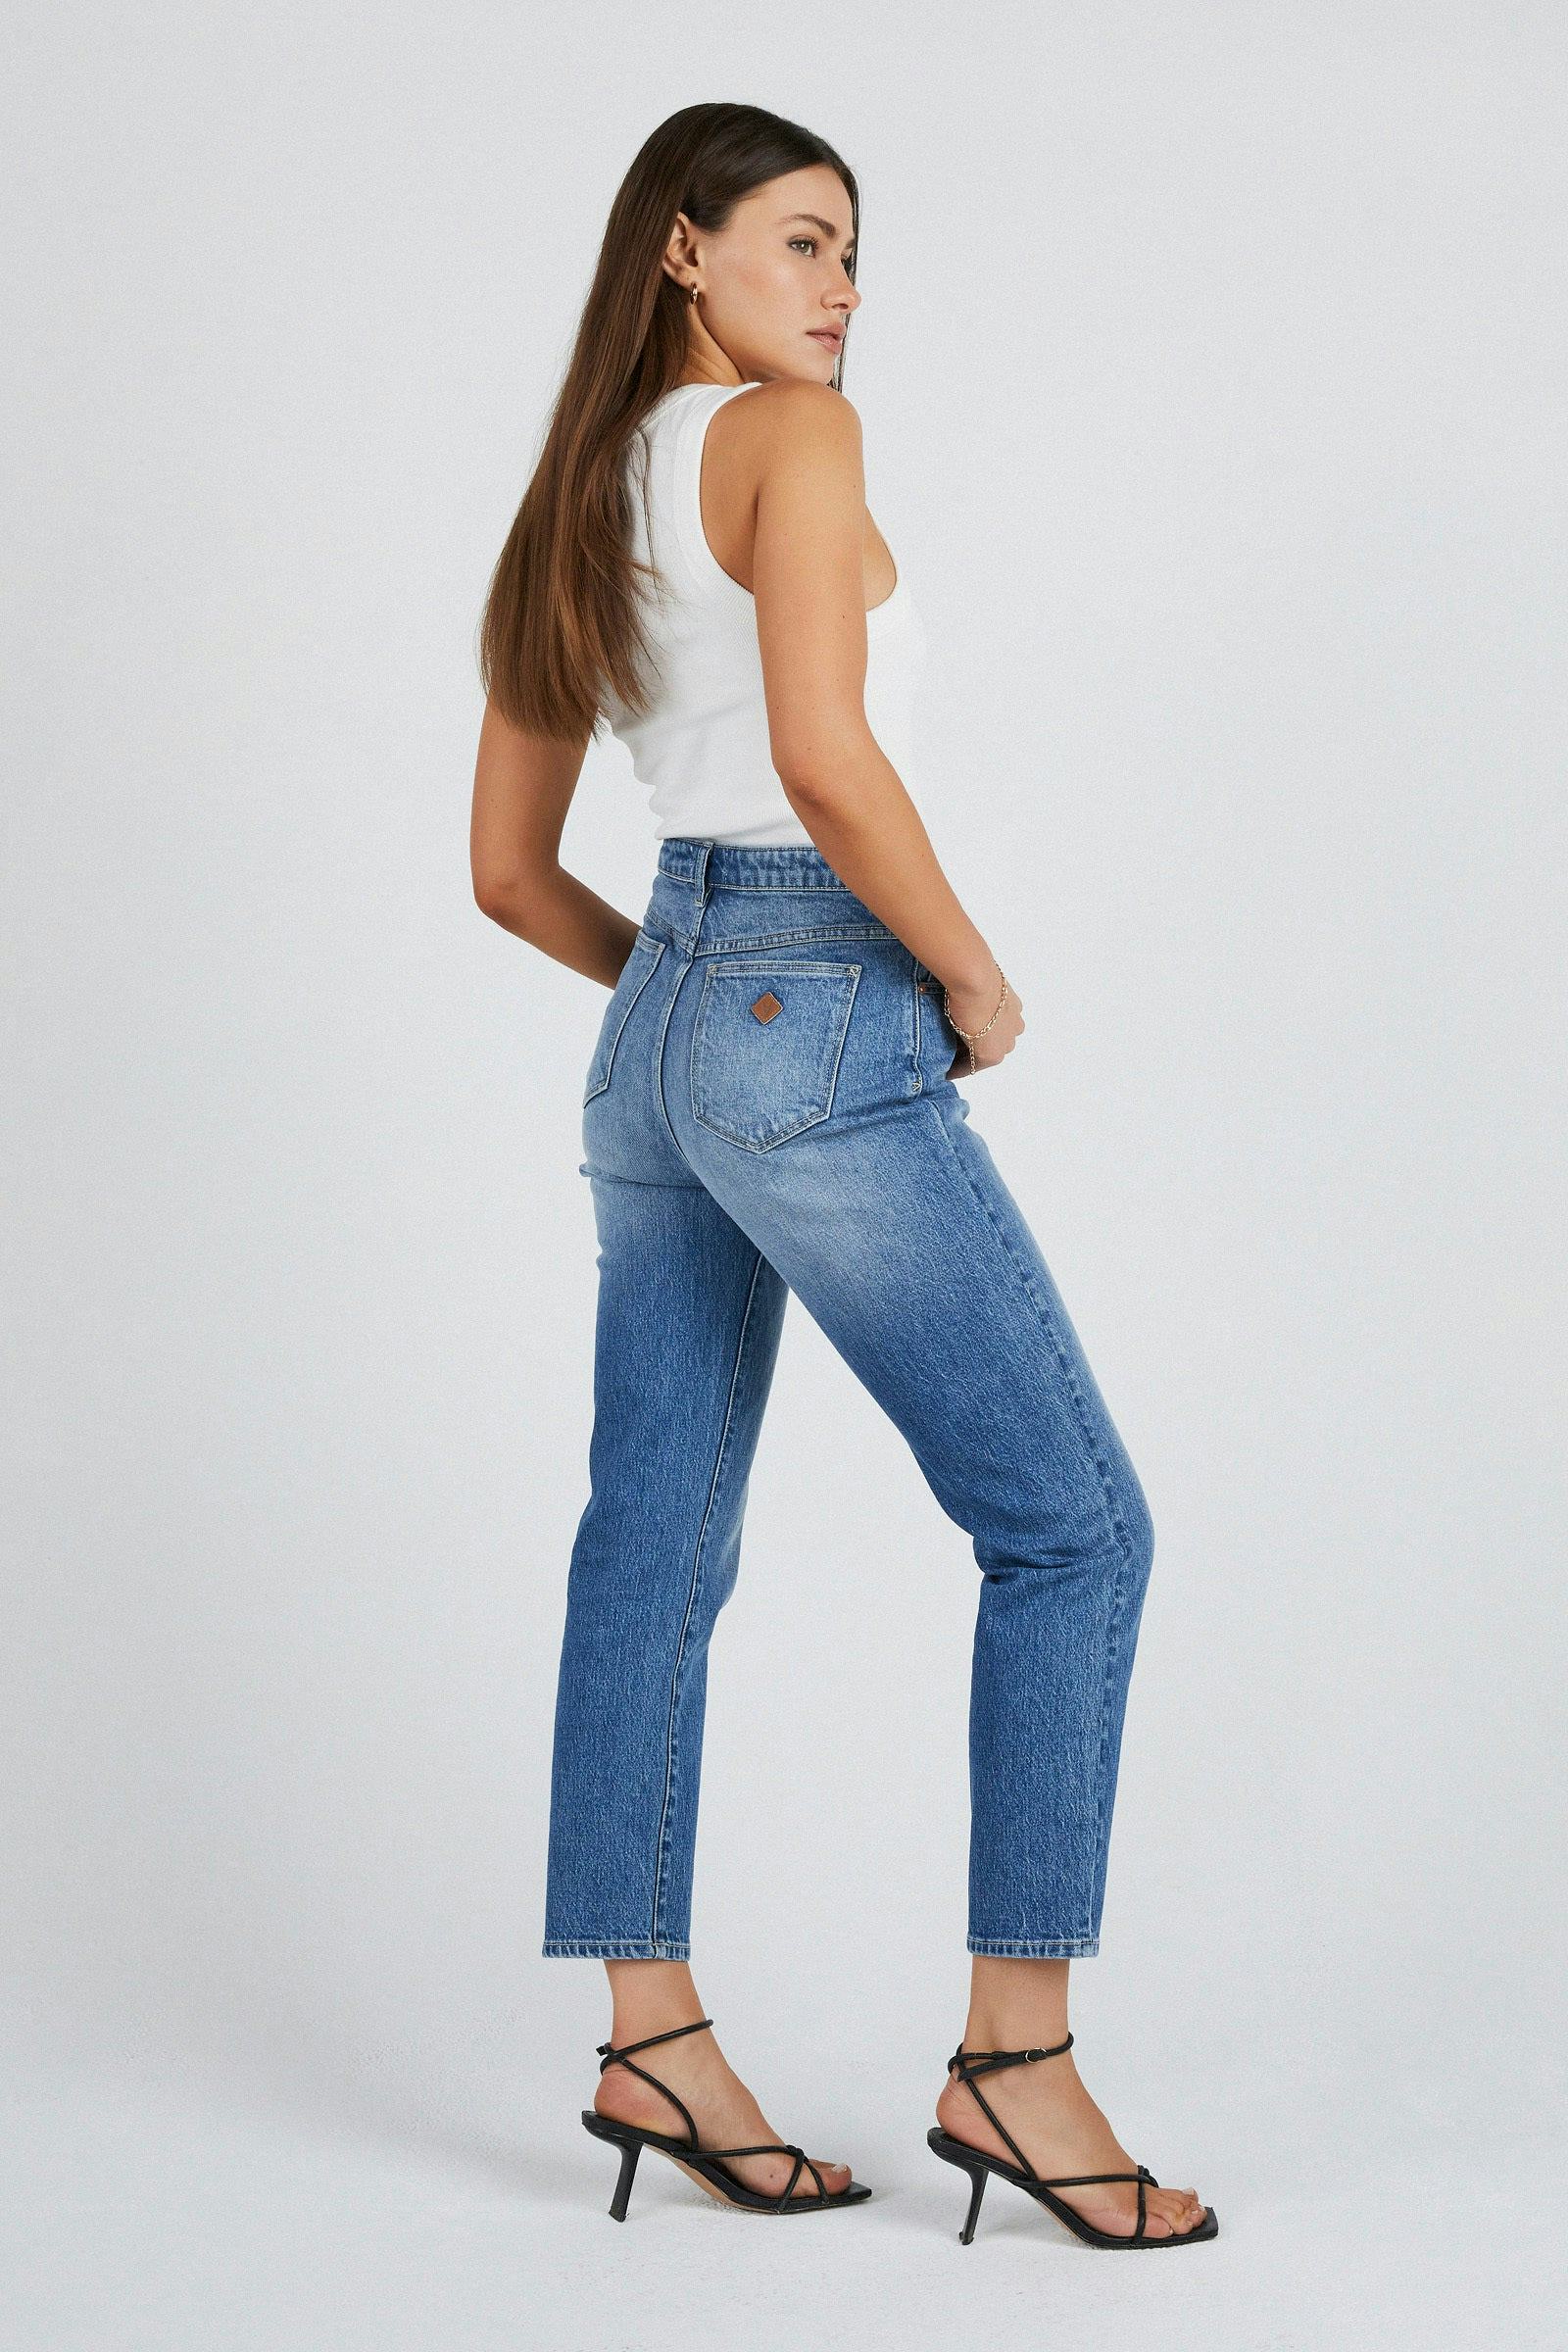 Buy 94 High Slim Hallee Recycled Online | Abrand Jeans